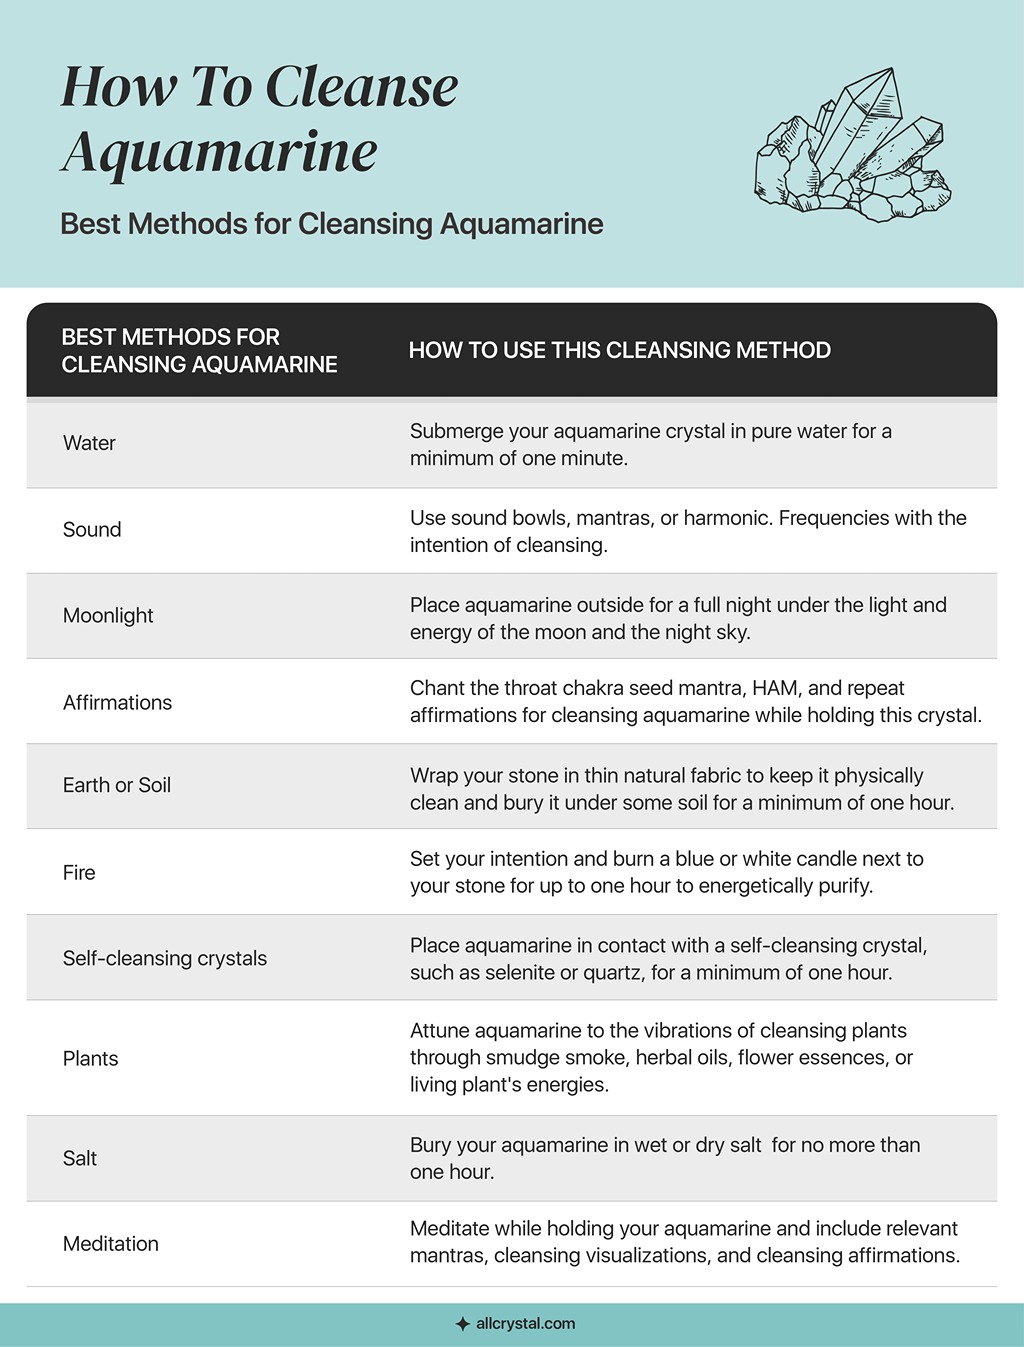 A custom graphic table for the Best Methods for Cleansing Aquamarine